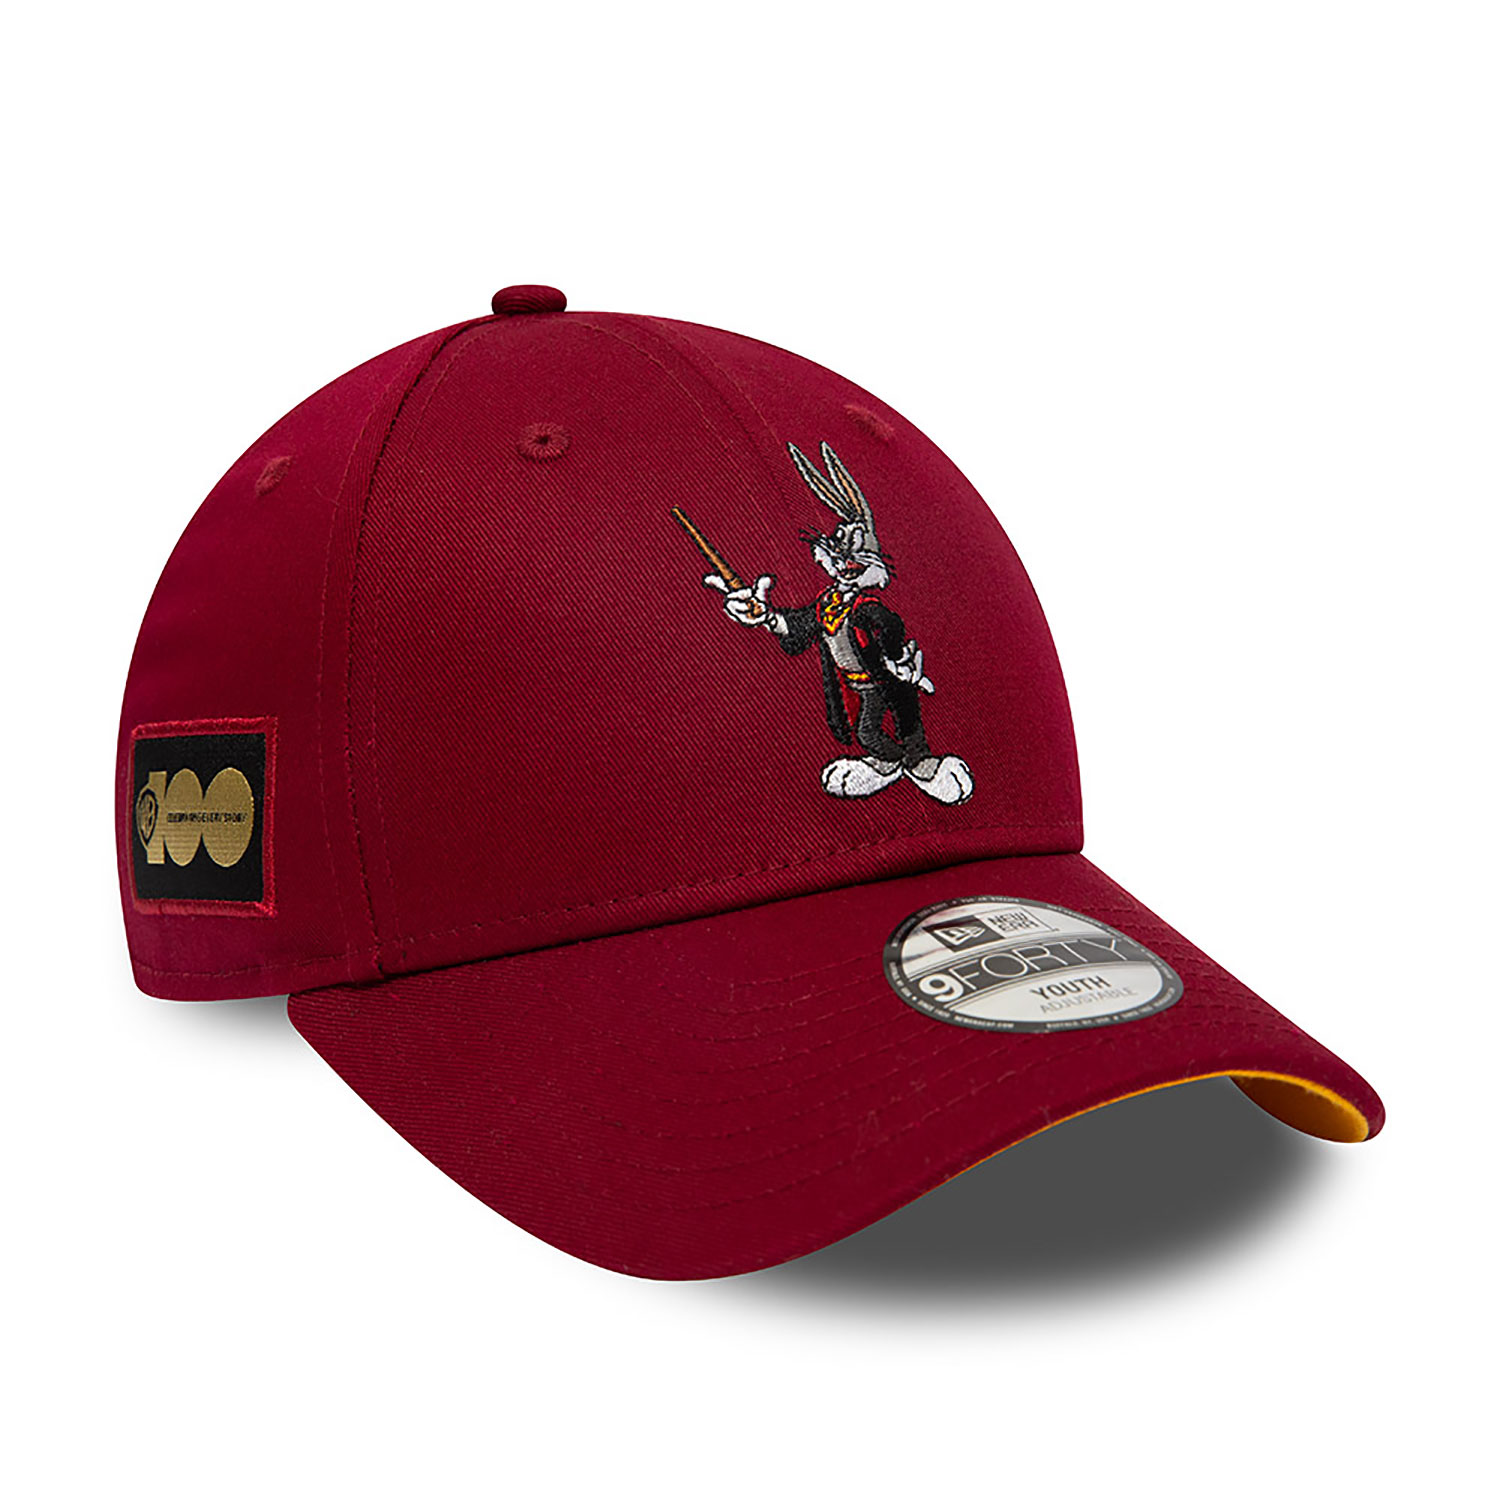 Looney Tunes x Harry Potter Bugs Bunny Youth Dark Red 9FORTY Adjustable Cap